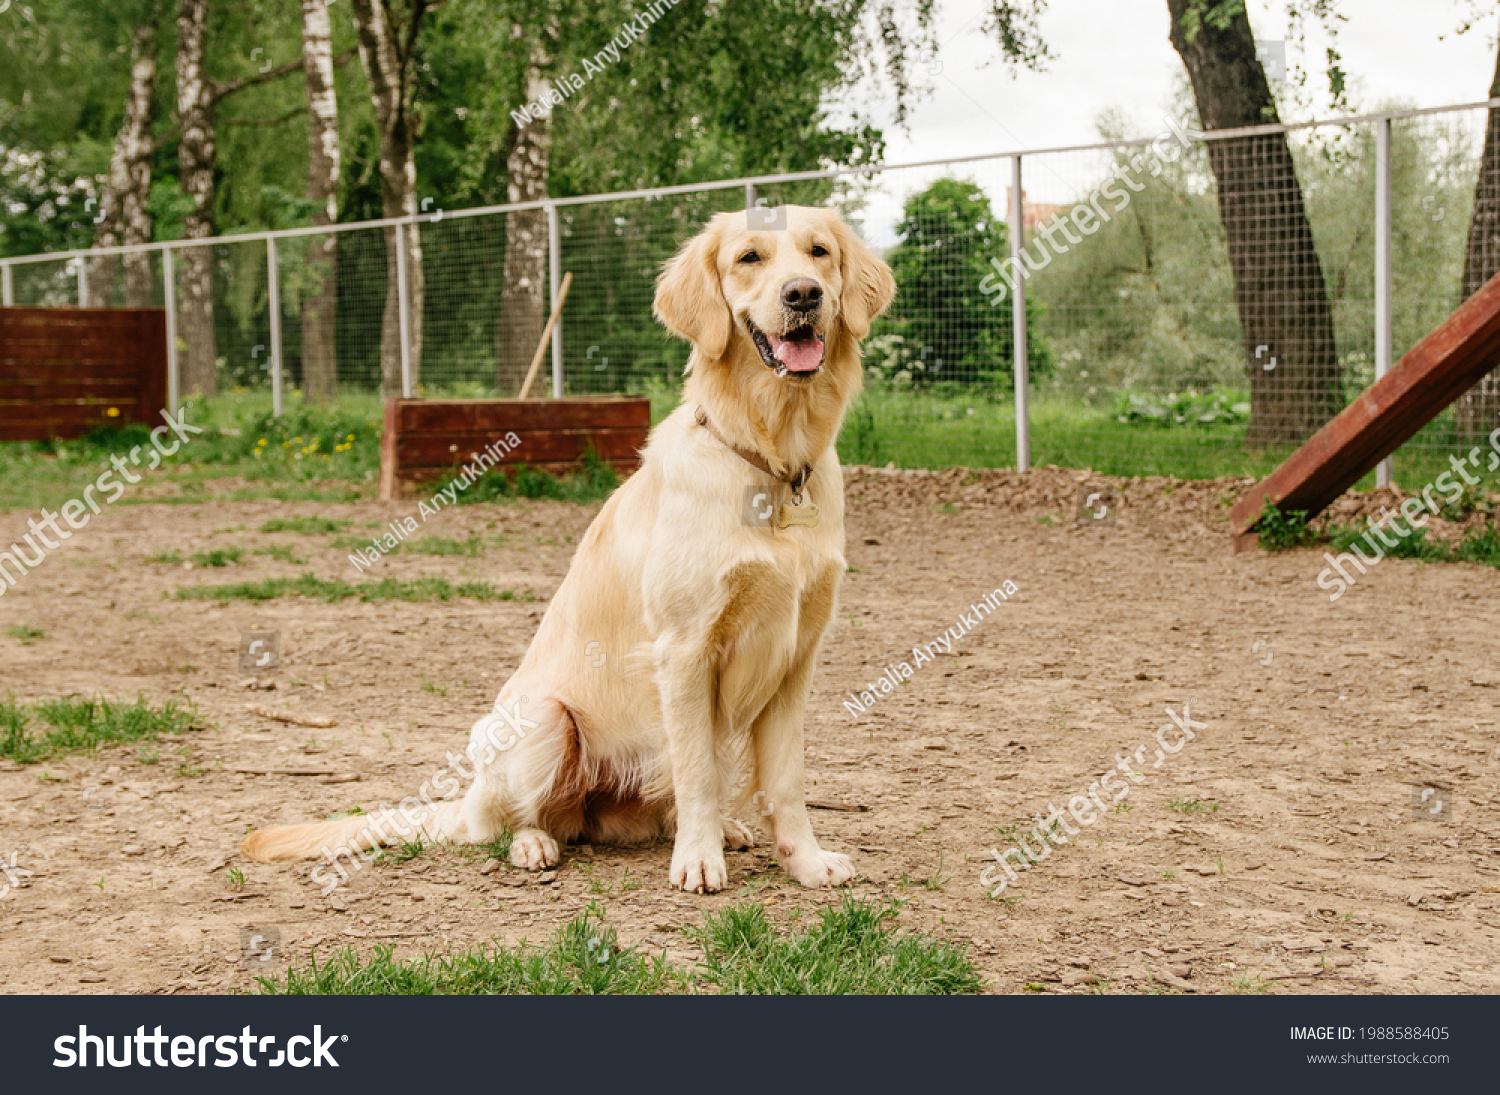 Golden Retriever dog performs the command to sit on the dog walking area #1988588405